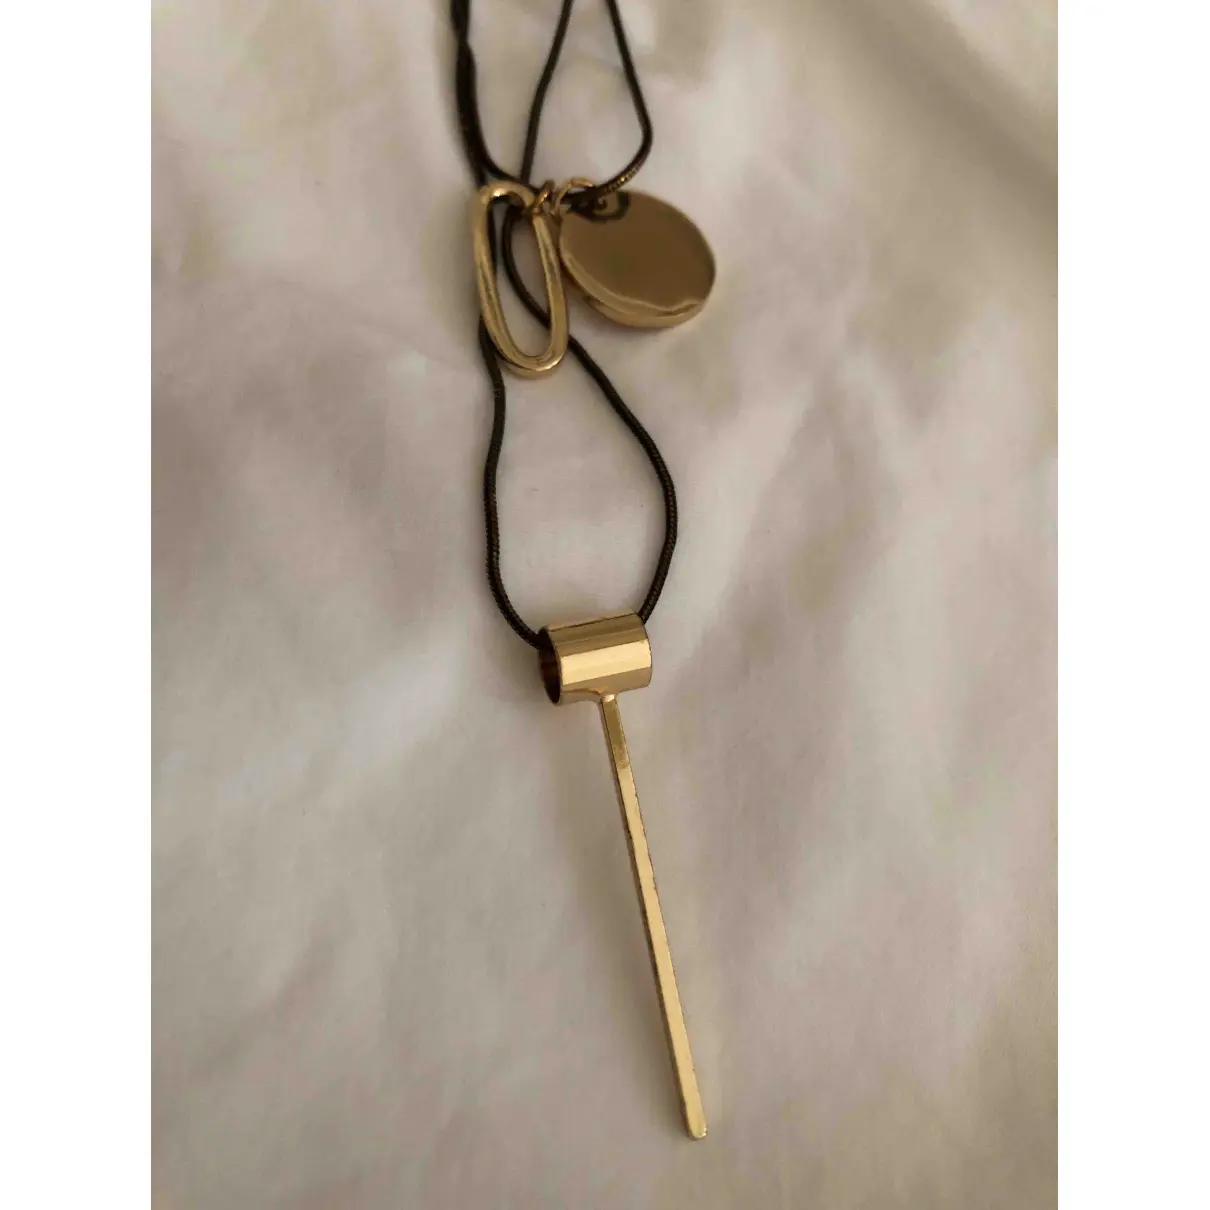 Buy French Connection Necklace online